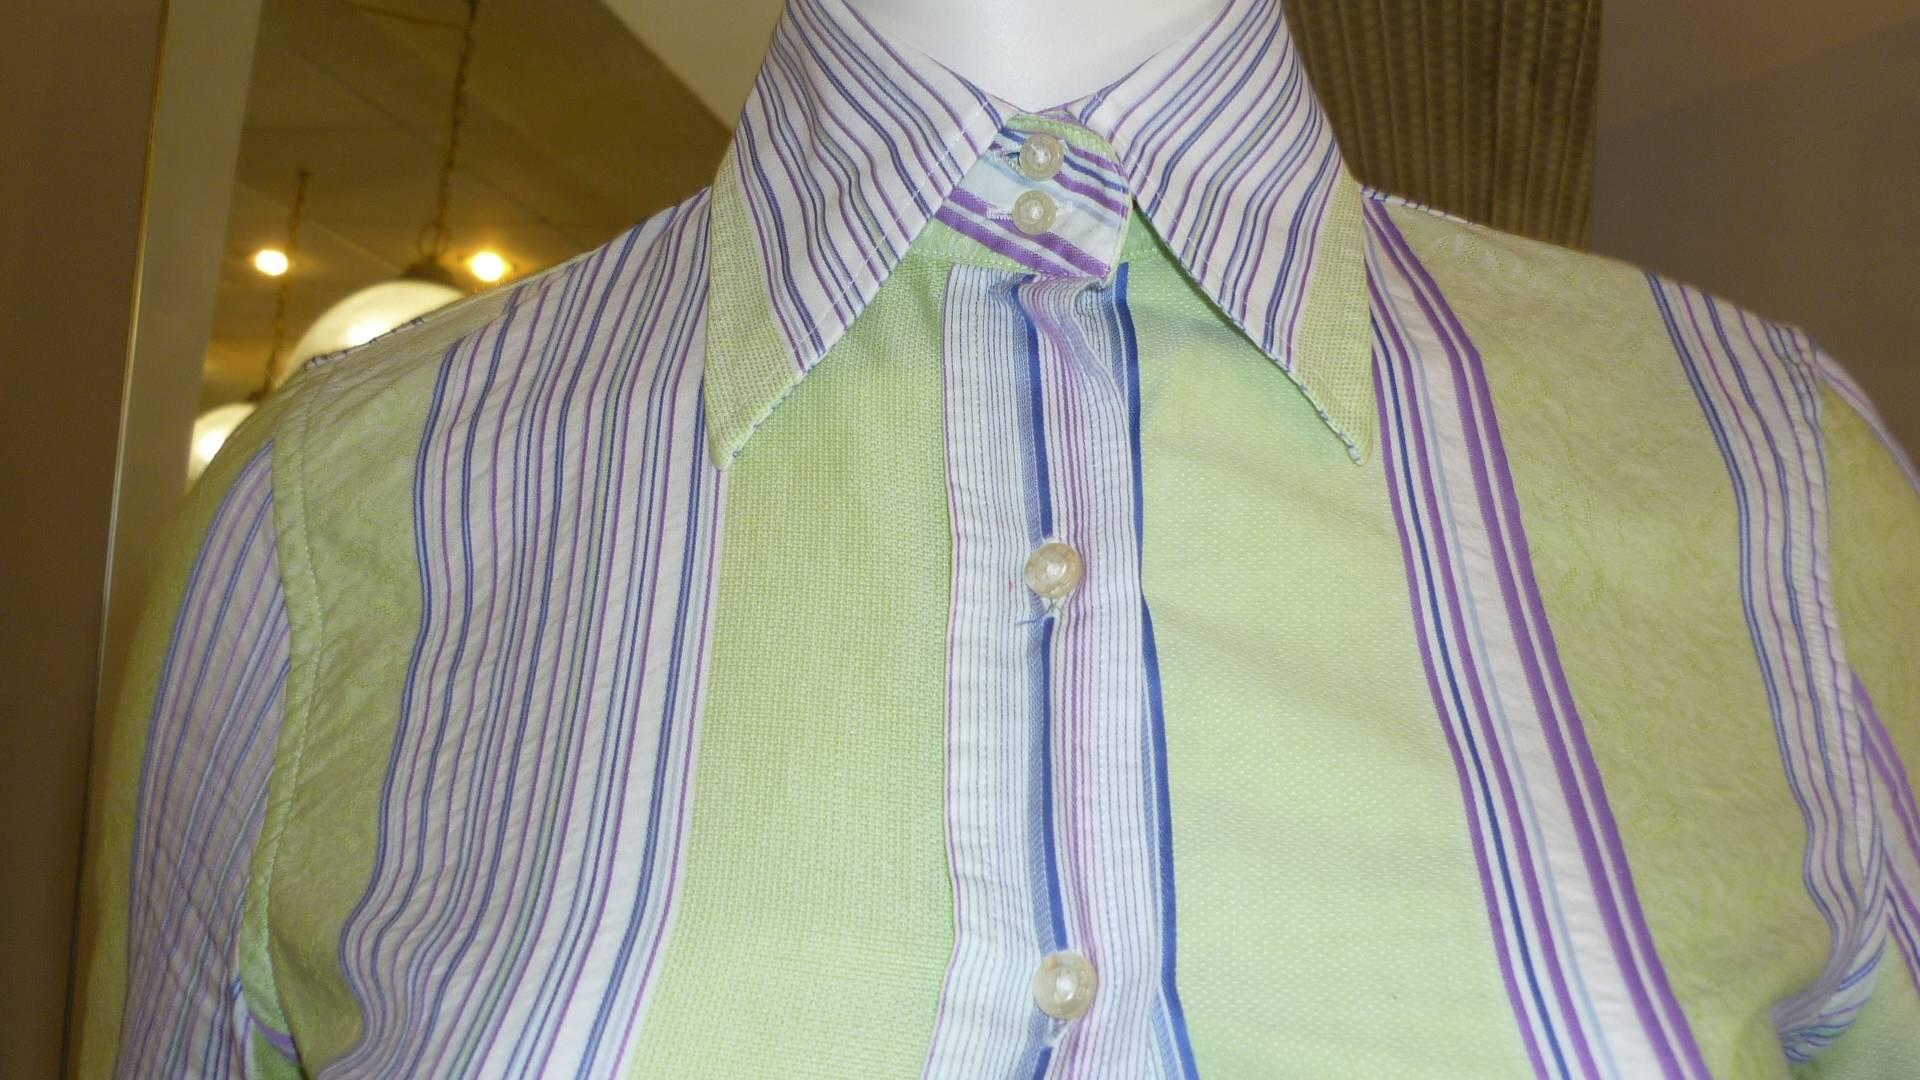 A mix of blue, purple, white and blue stripes as well as a green lace effect.  This is a beautiful shirt which can be dressed up or down.